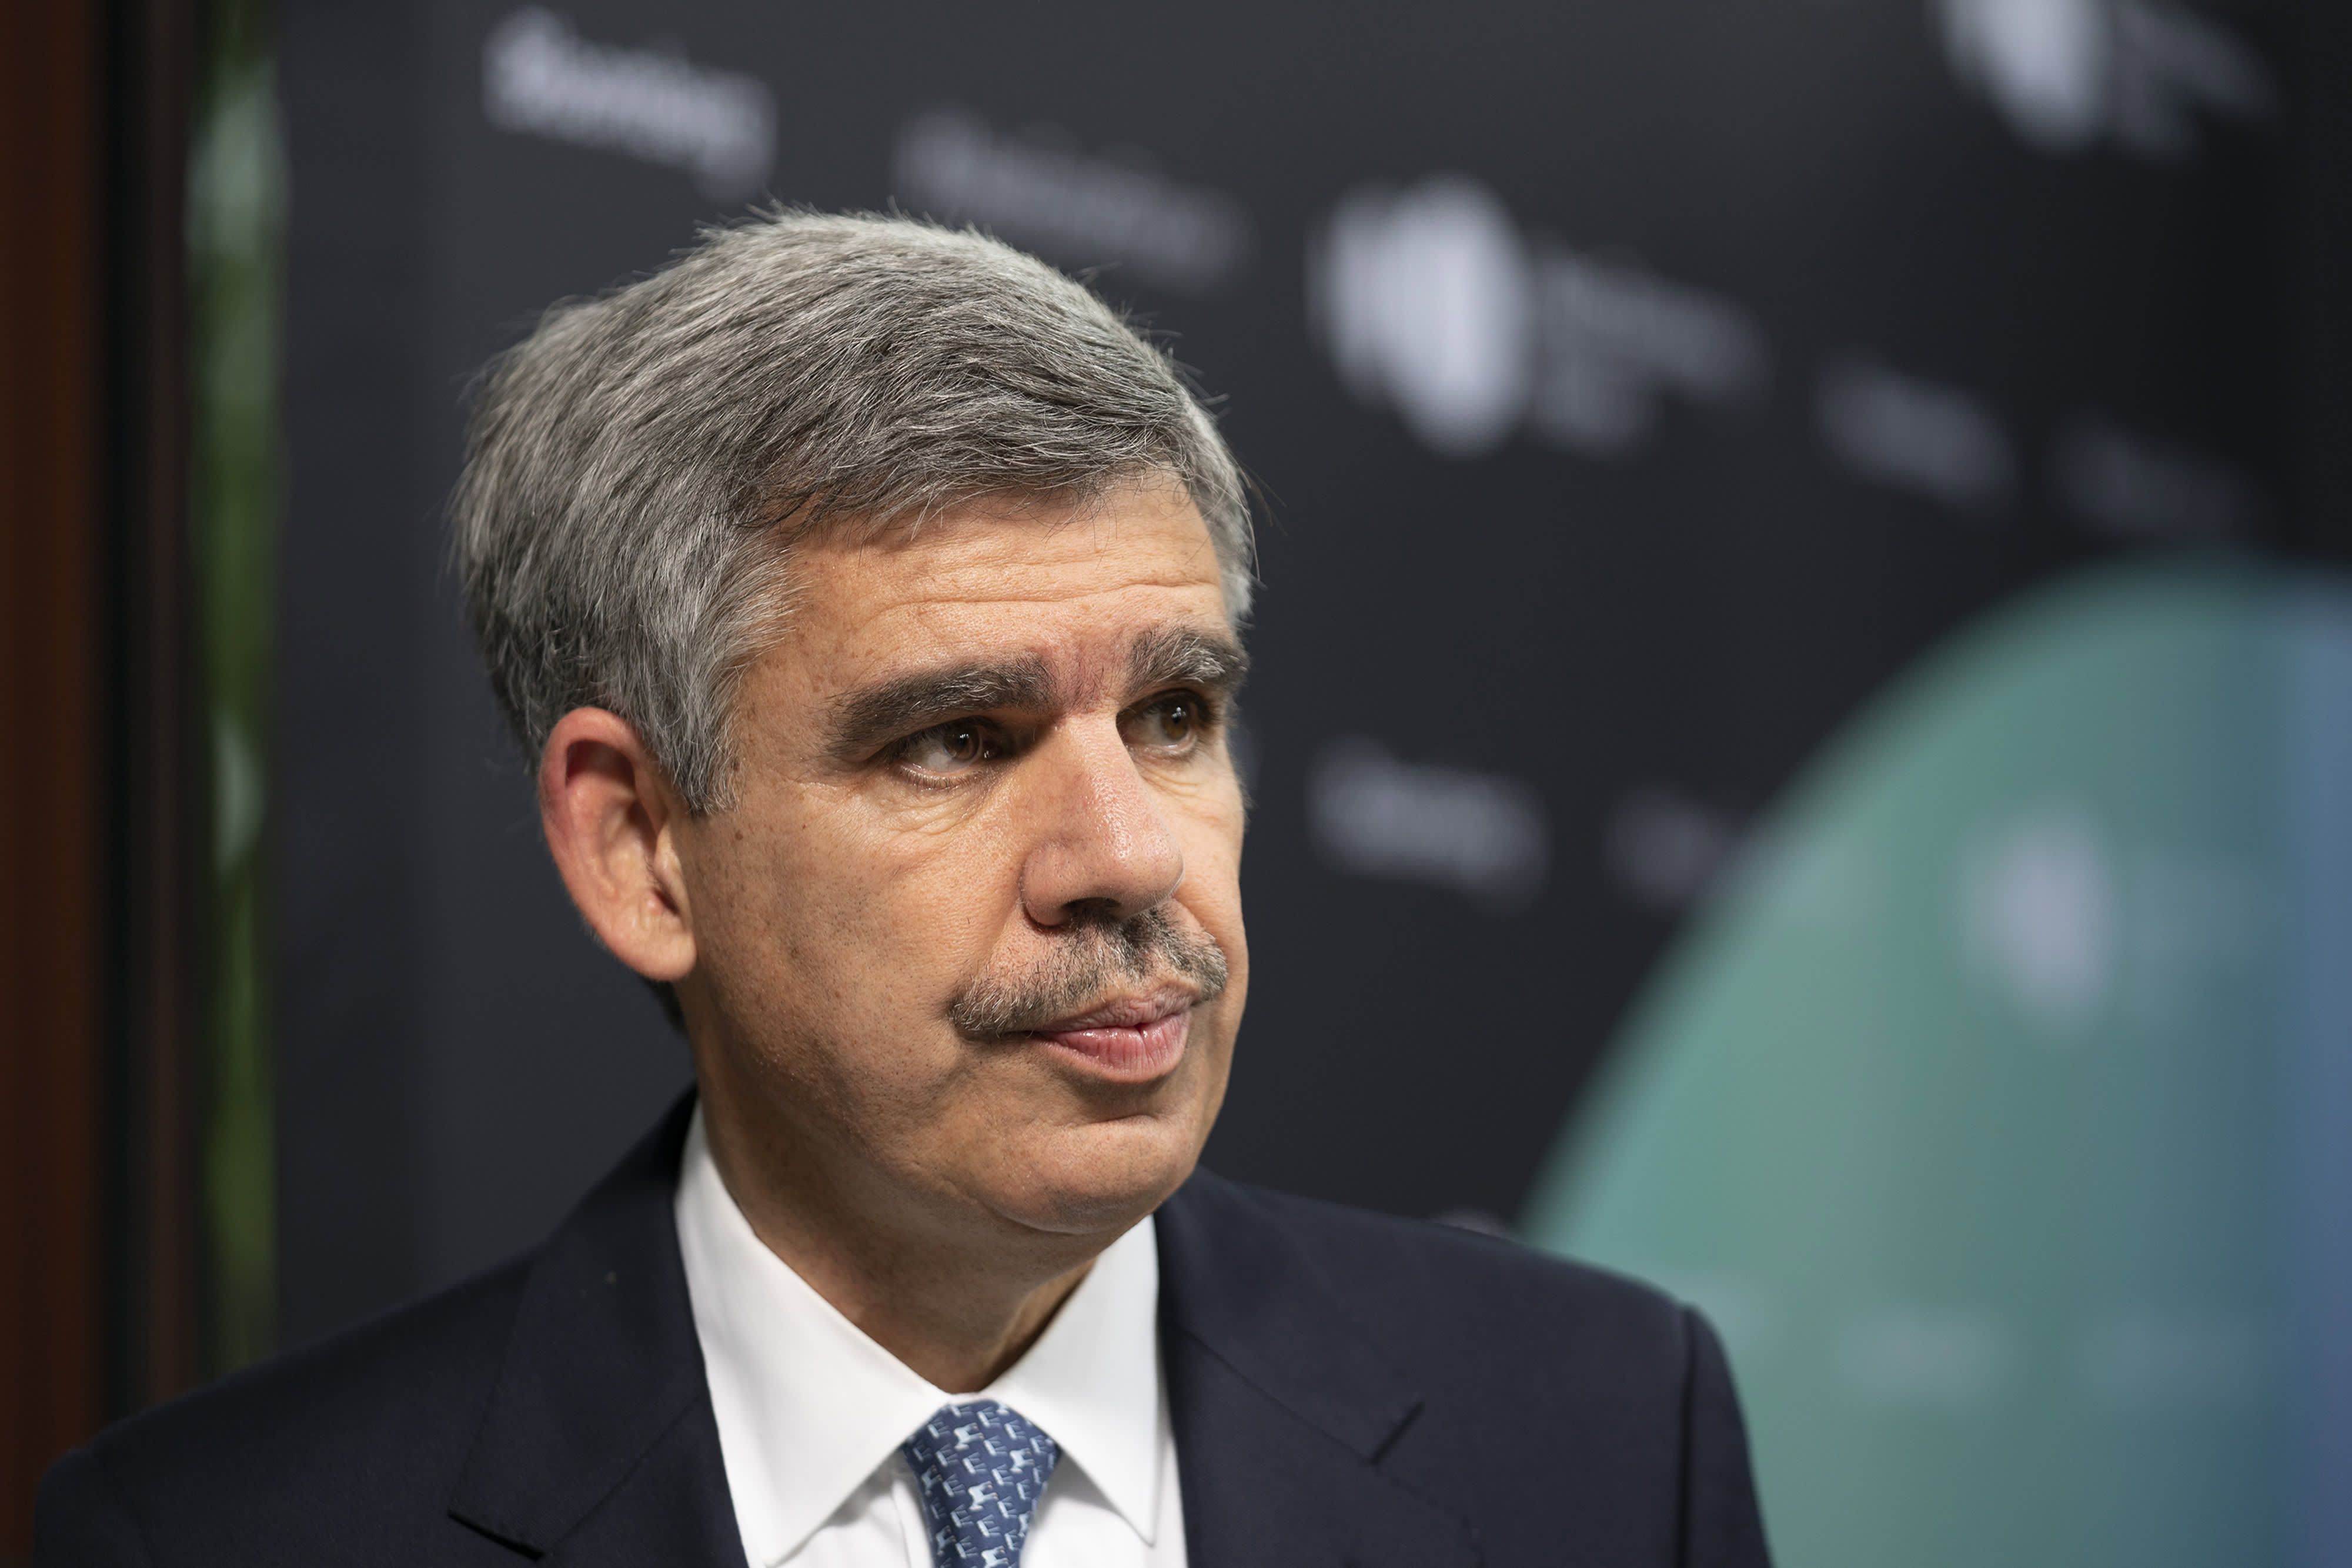 The Fed is losing credibility over its inflation narrative, says Mohamed El-Erian